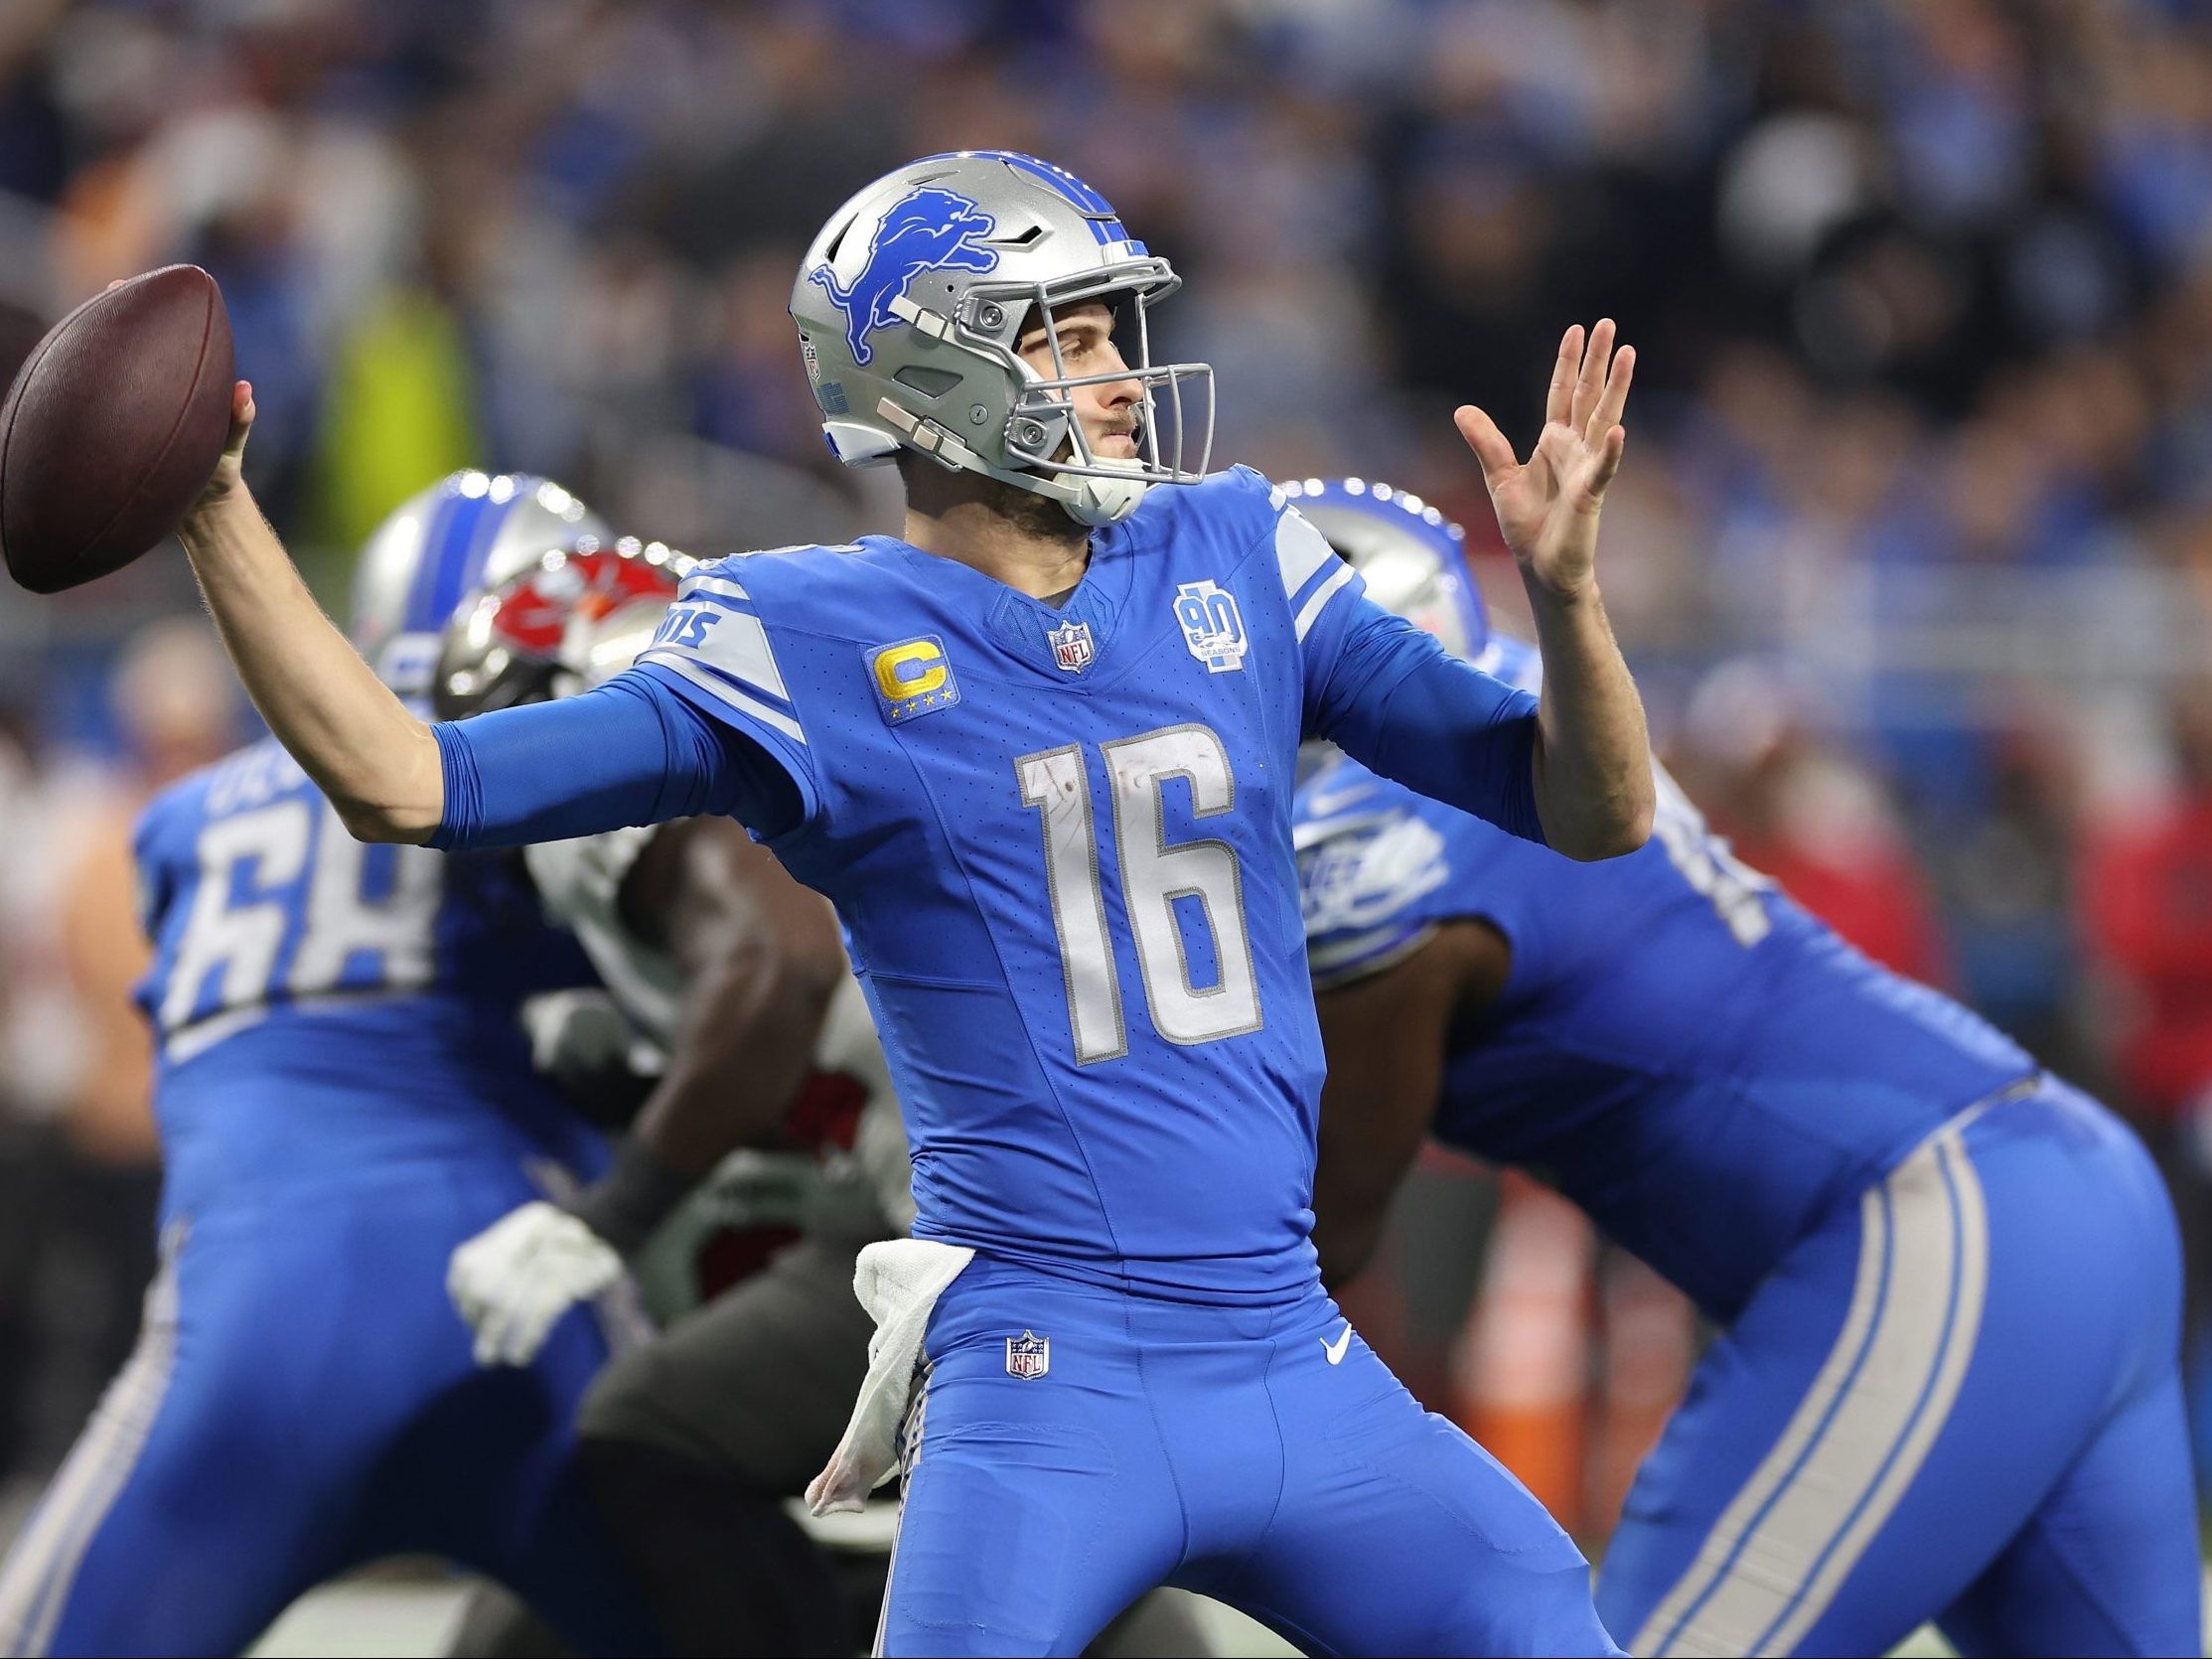 Lions advance to NFC title game with 31-23 win over Buccaneers